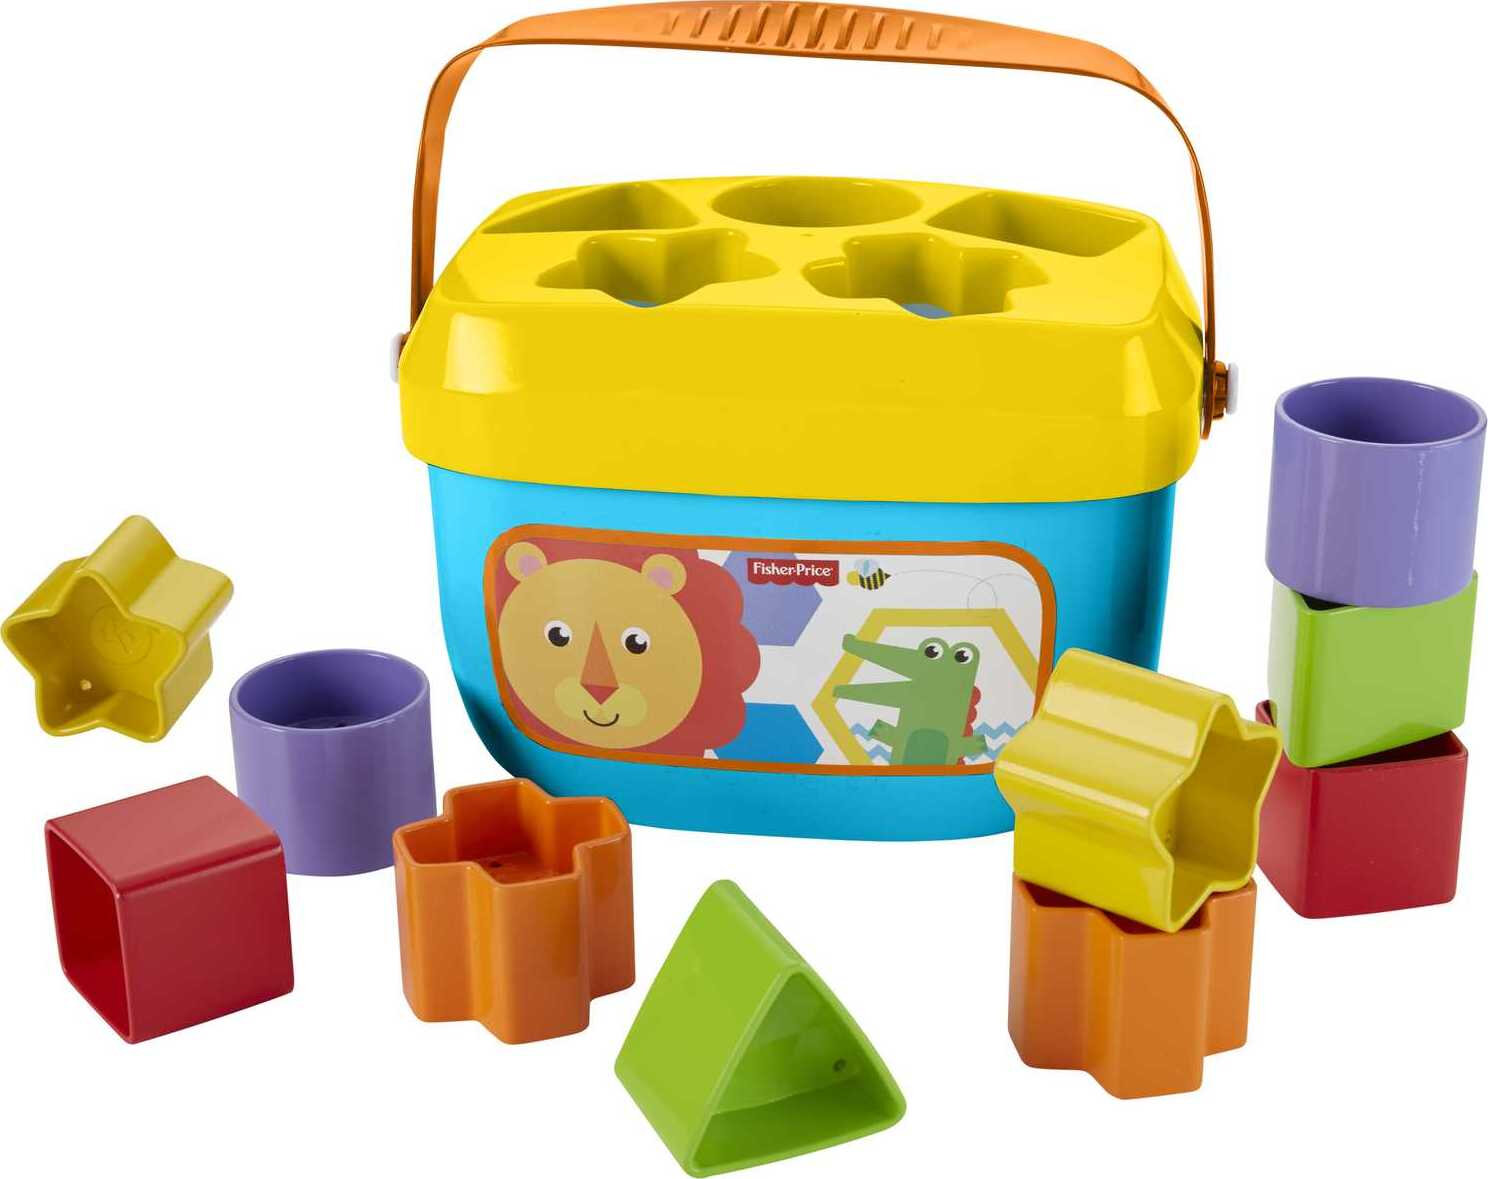 Fisher-Price Baby’s First Blocks Shape-Sorting Toy, Set of 10, for Infants 6+ Months - image 1 of 7